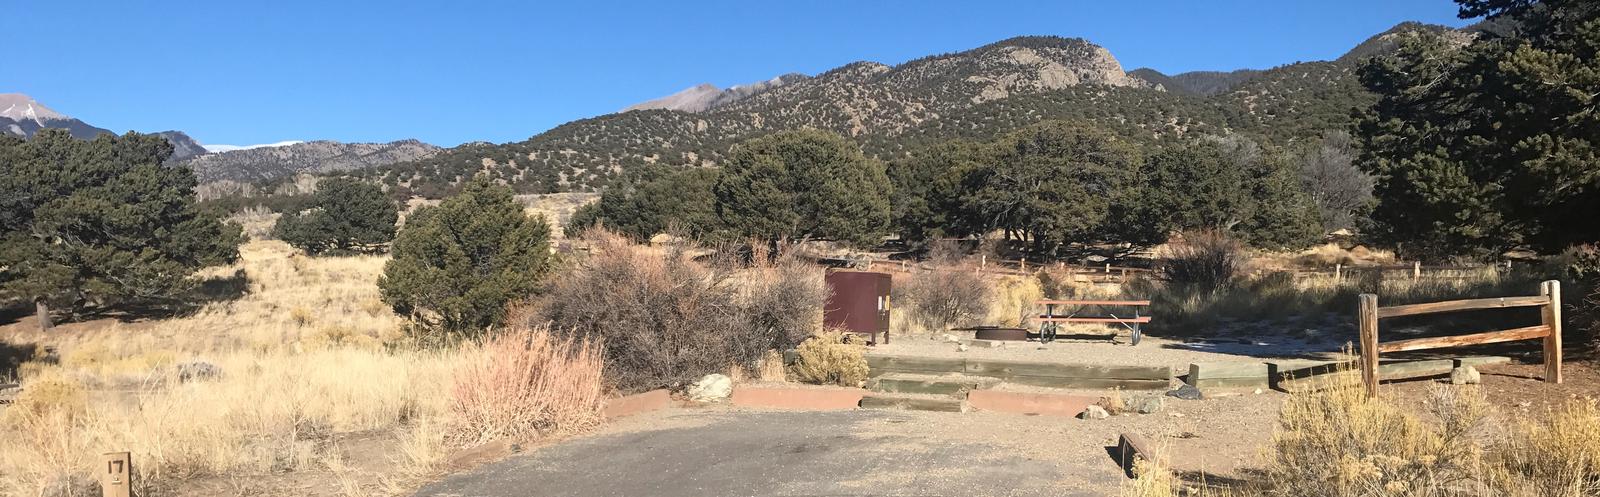 Wide view of Site #17 parking pad, stairs, fenced tent pad, bear box, fire ring, and picnic table. Mountains can be seen in the background.Site #17, Pinon Flats Campground